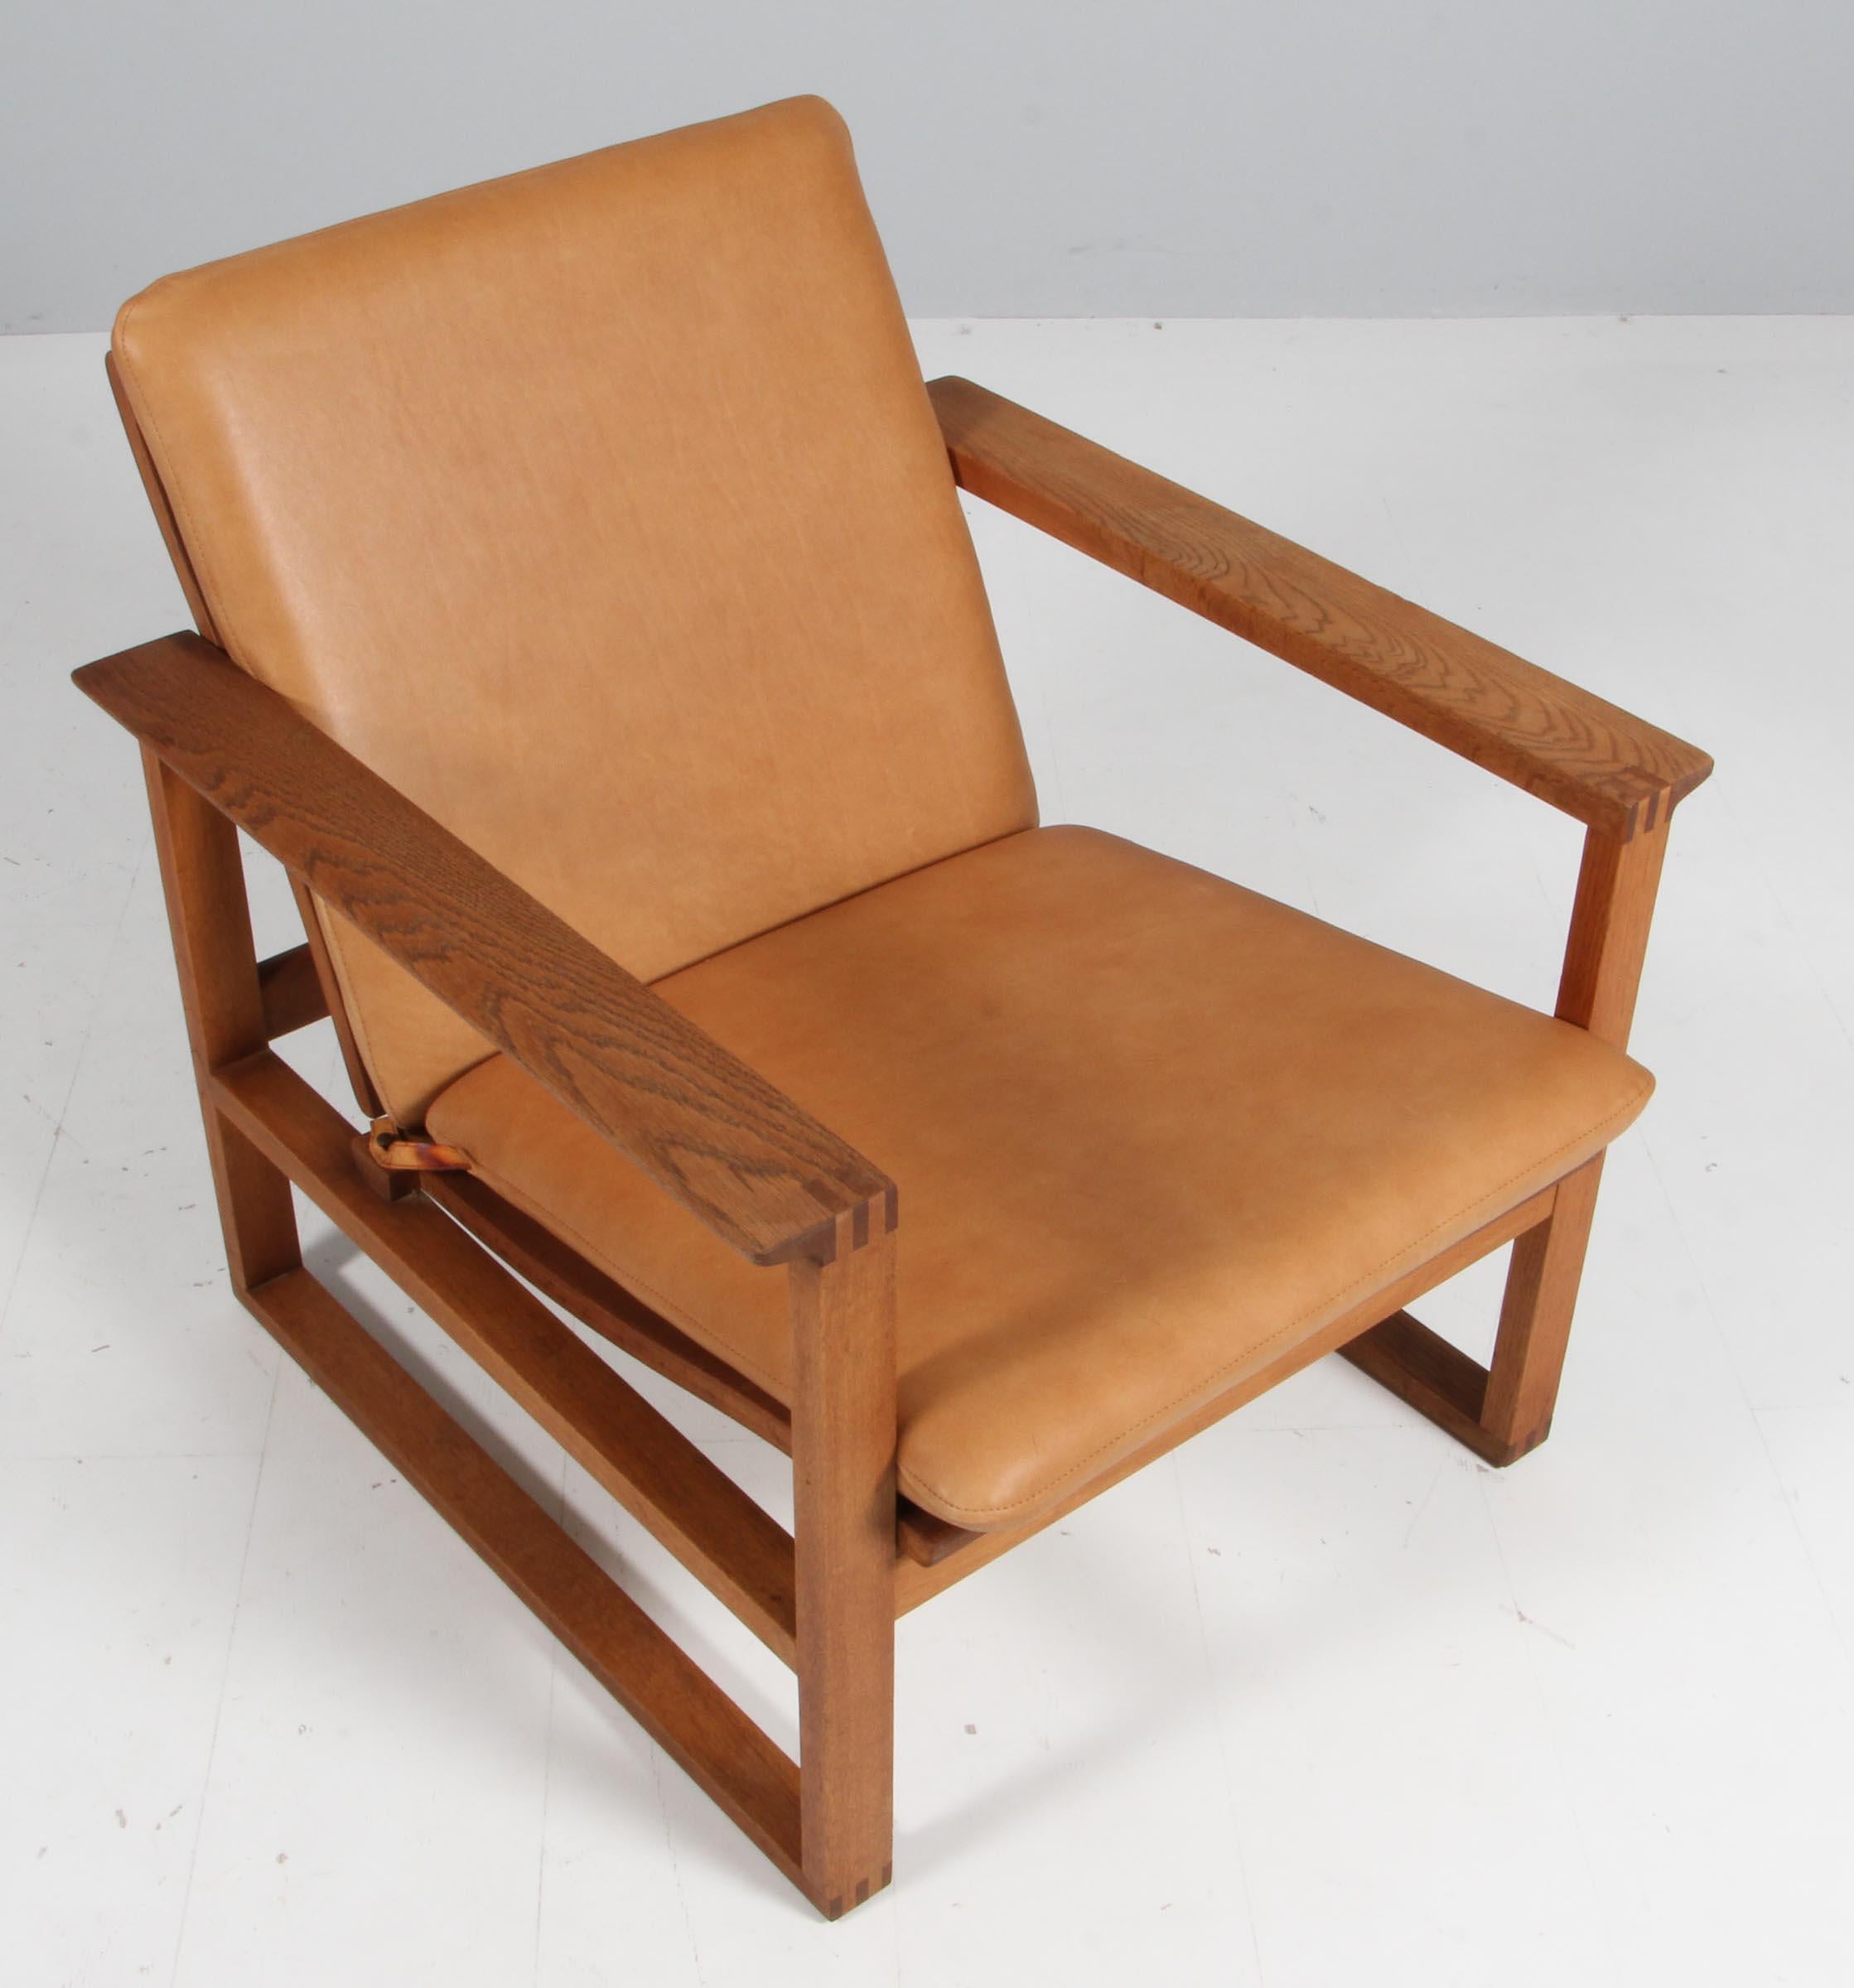 Børge Mogensen lounge chair new upholstered with vintage aniline leather.

Frame of oil treated oak.

Model 2256, made by Fredericia furniture.